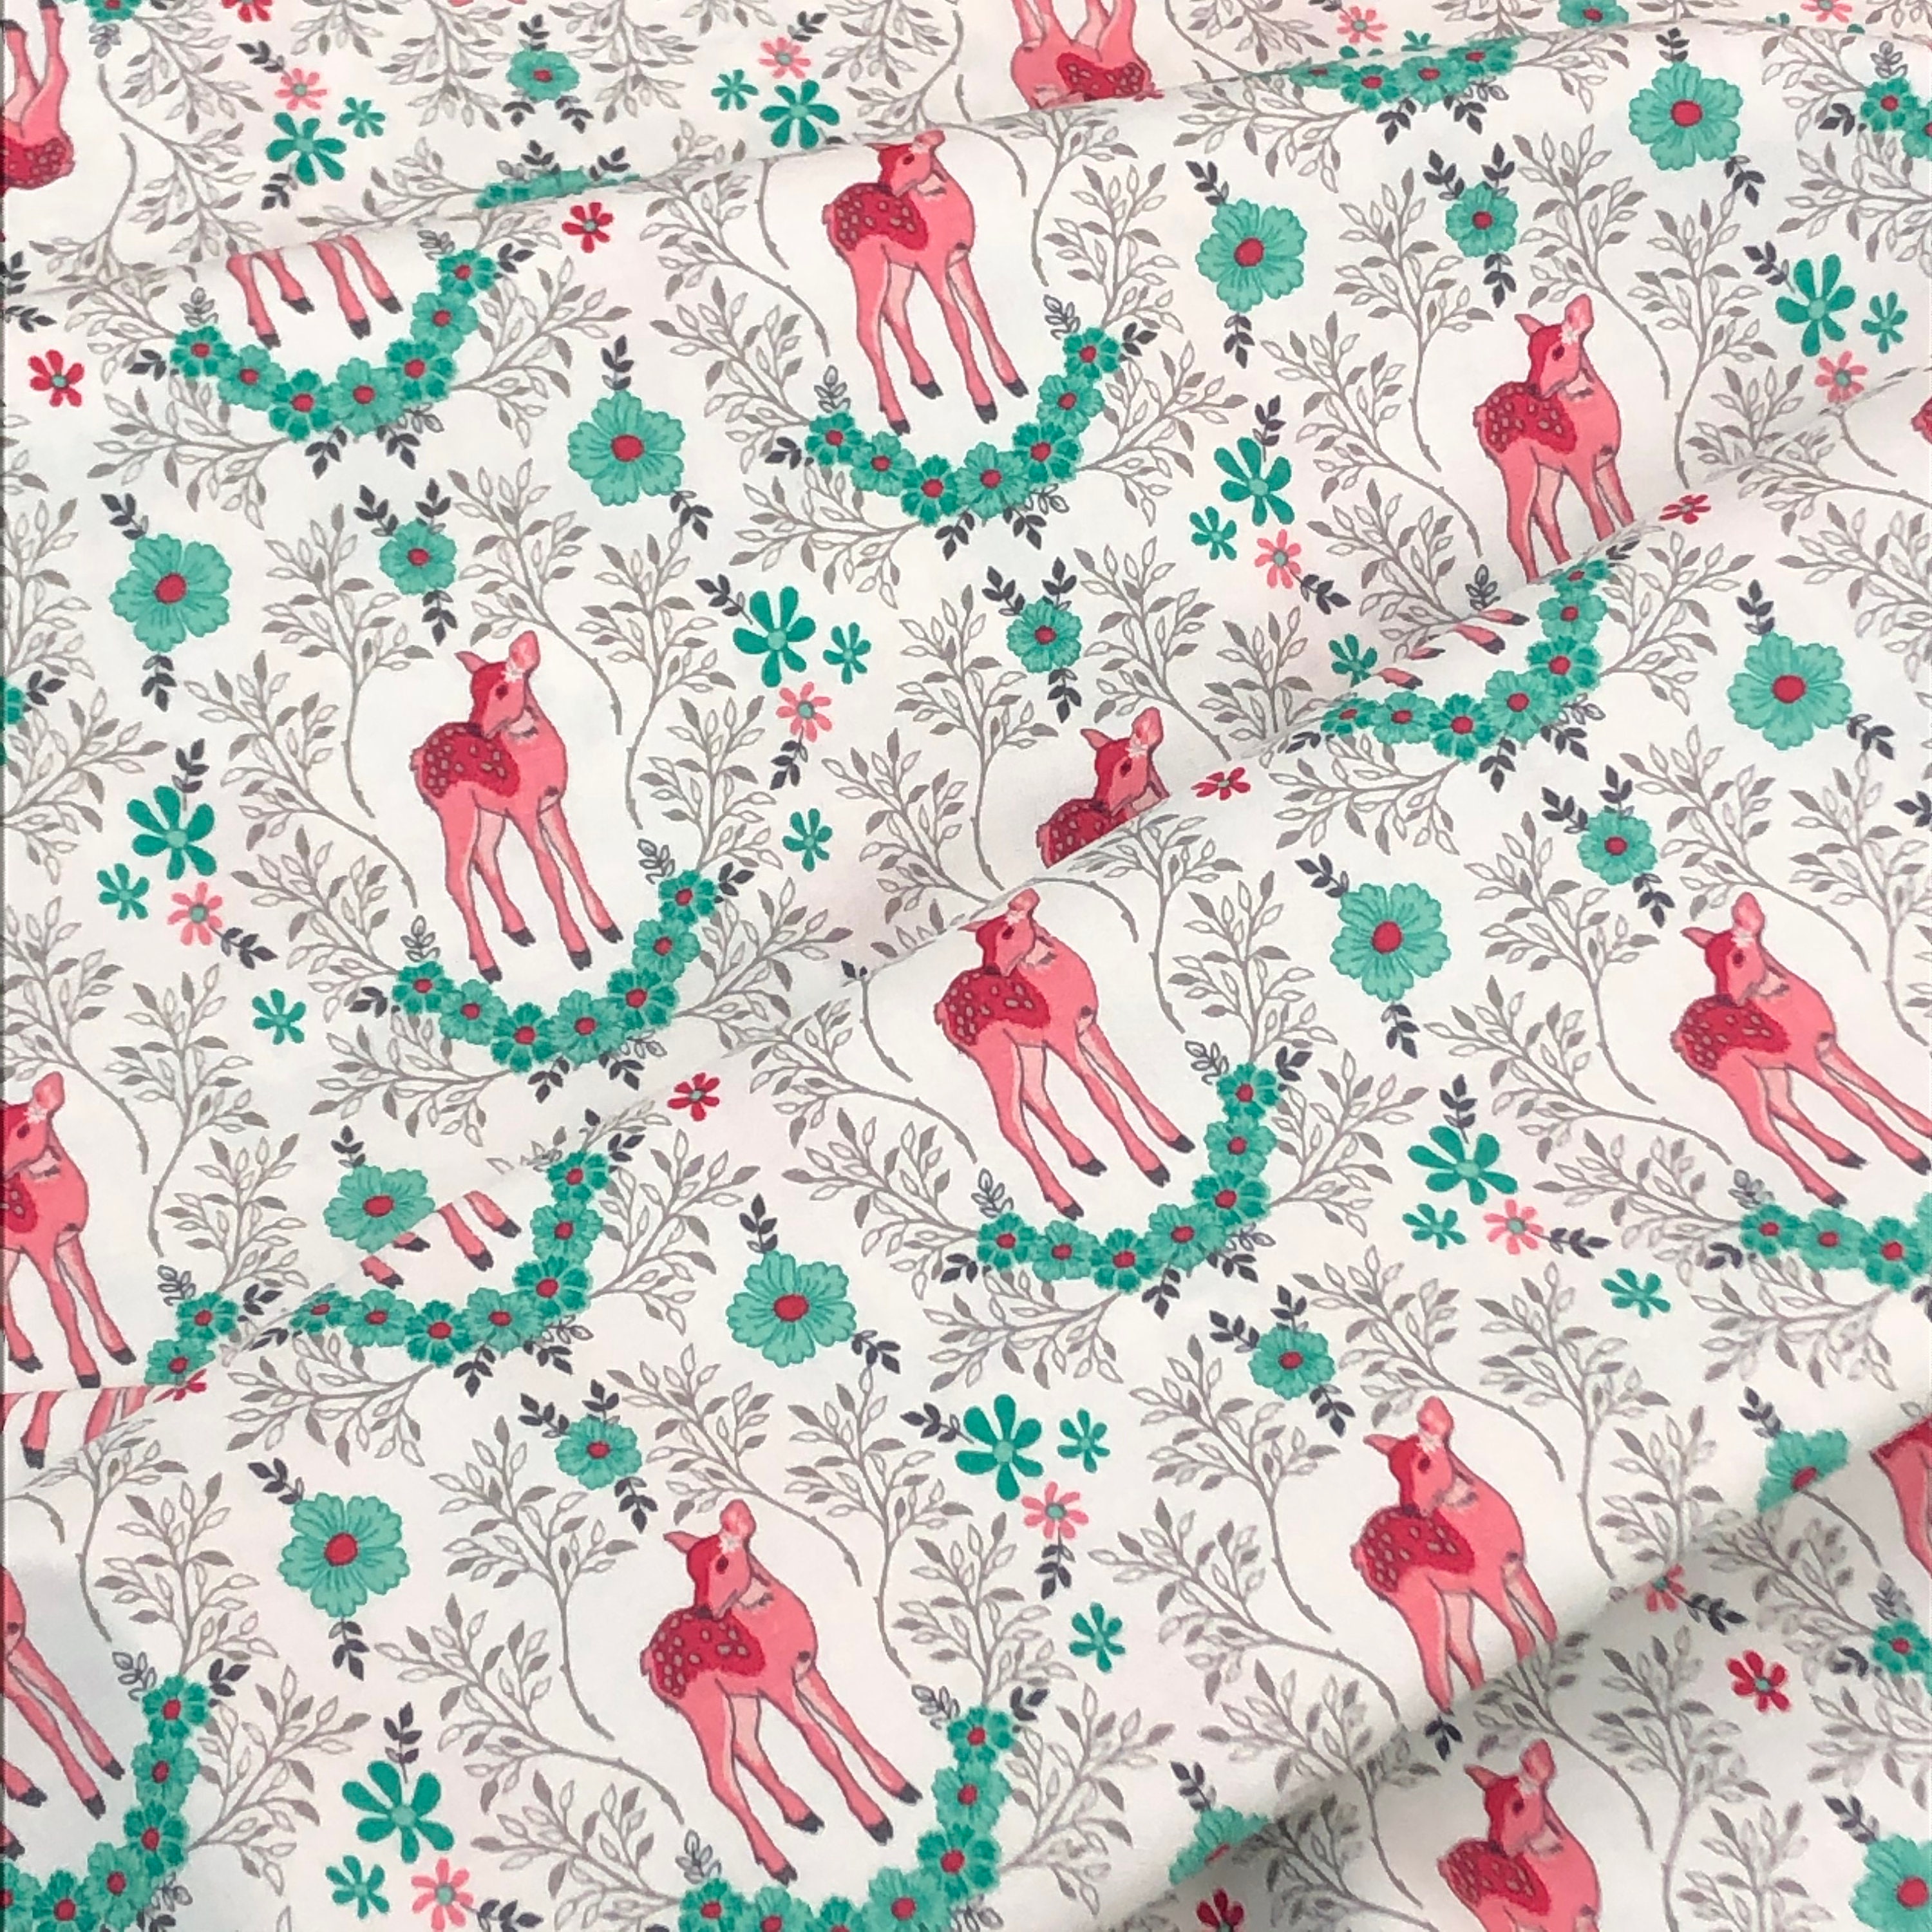 Flora and Fawn Fabric Riley Blake Fabric Flower garden | Etsy